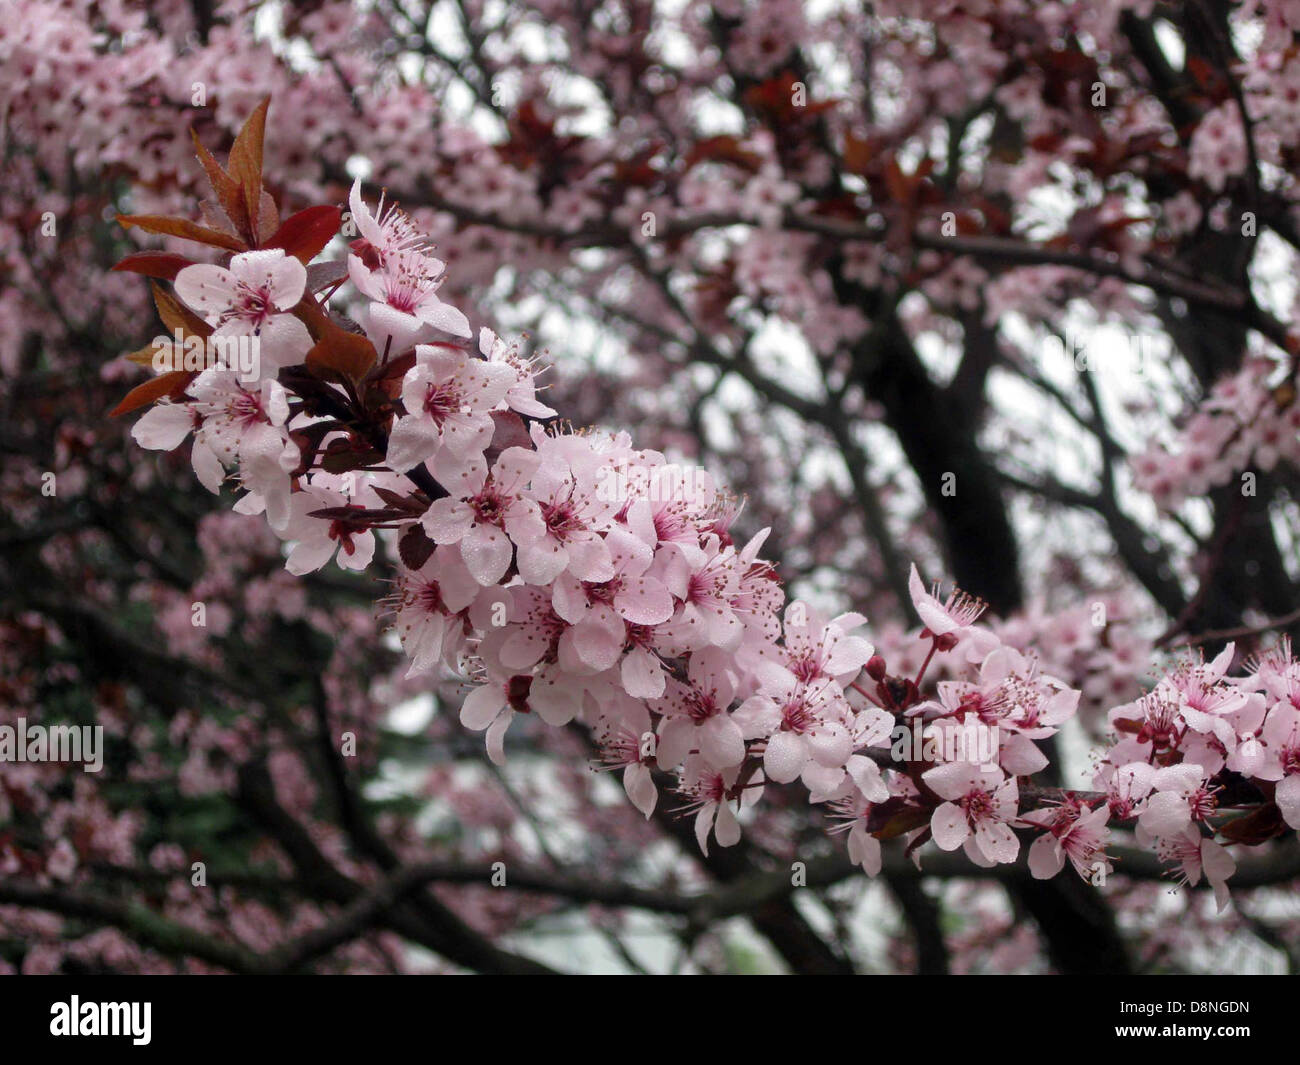 Wild cherry in bloom on a branch. Stock Photo